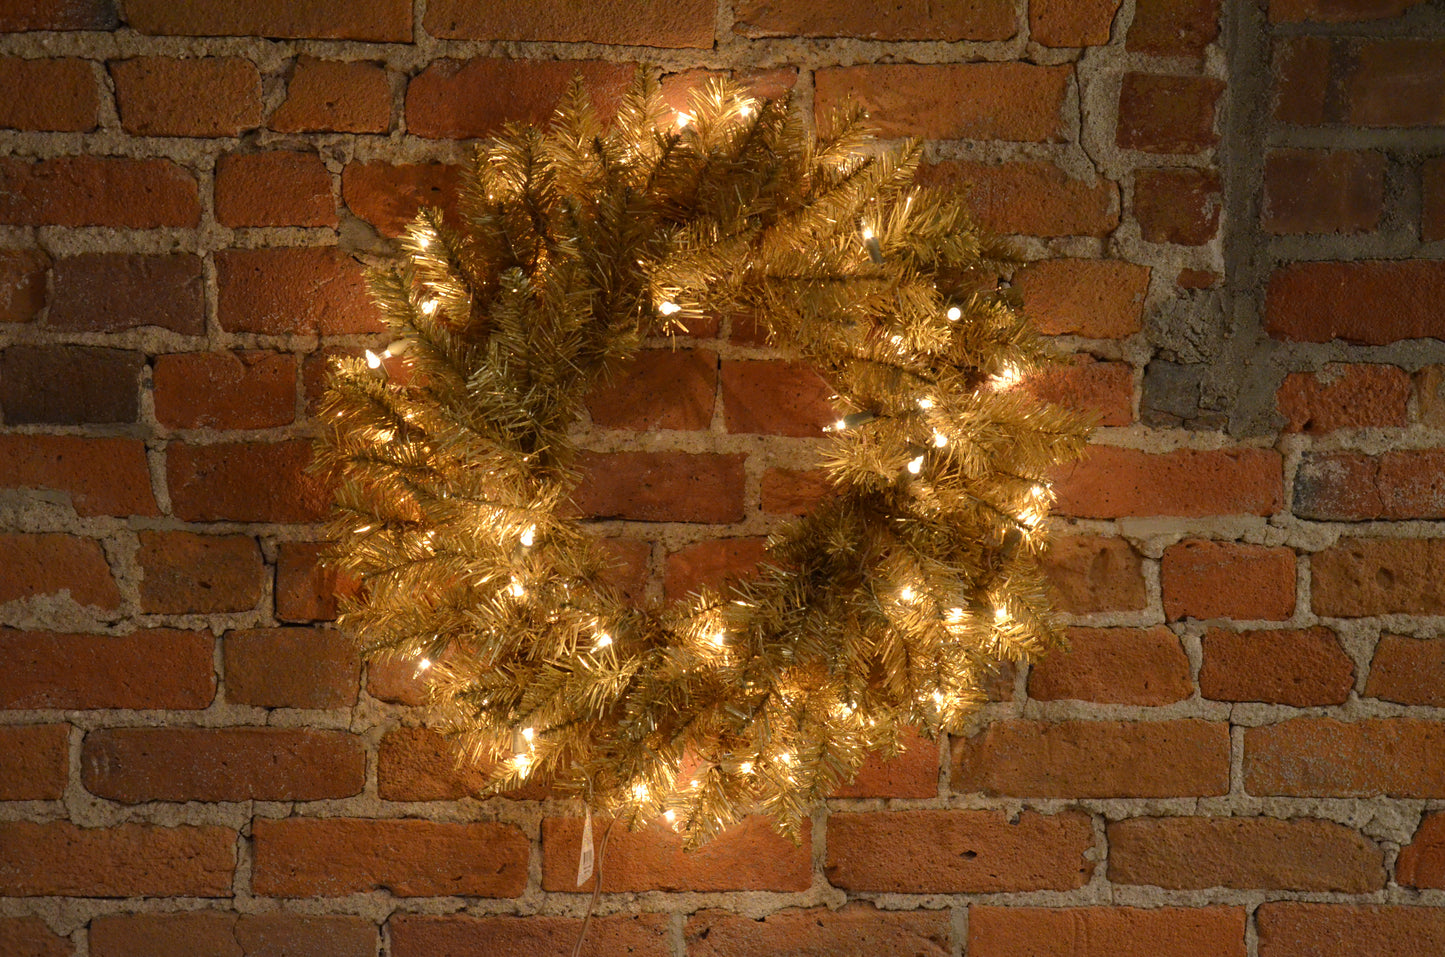 24" Gold Fir Artificial Christmas Wreath with Warm White Dura-lit LED Lights